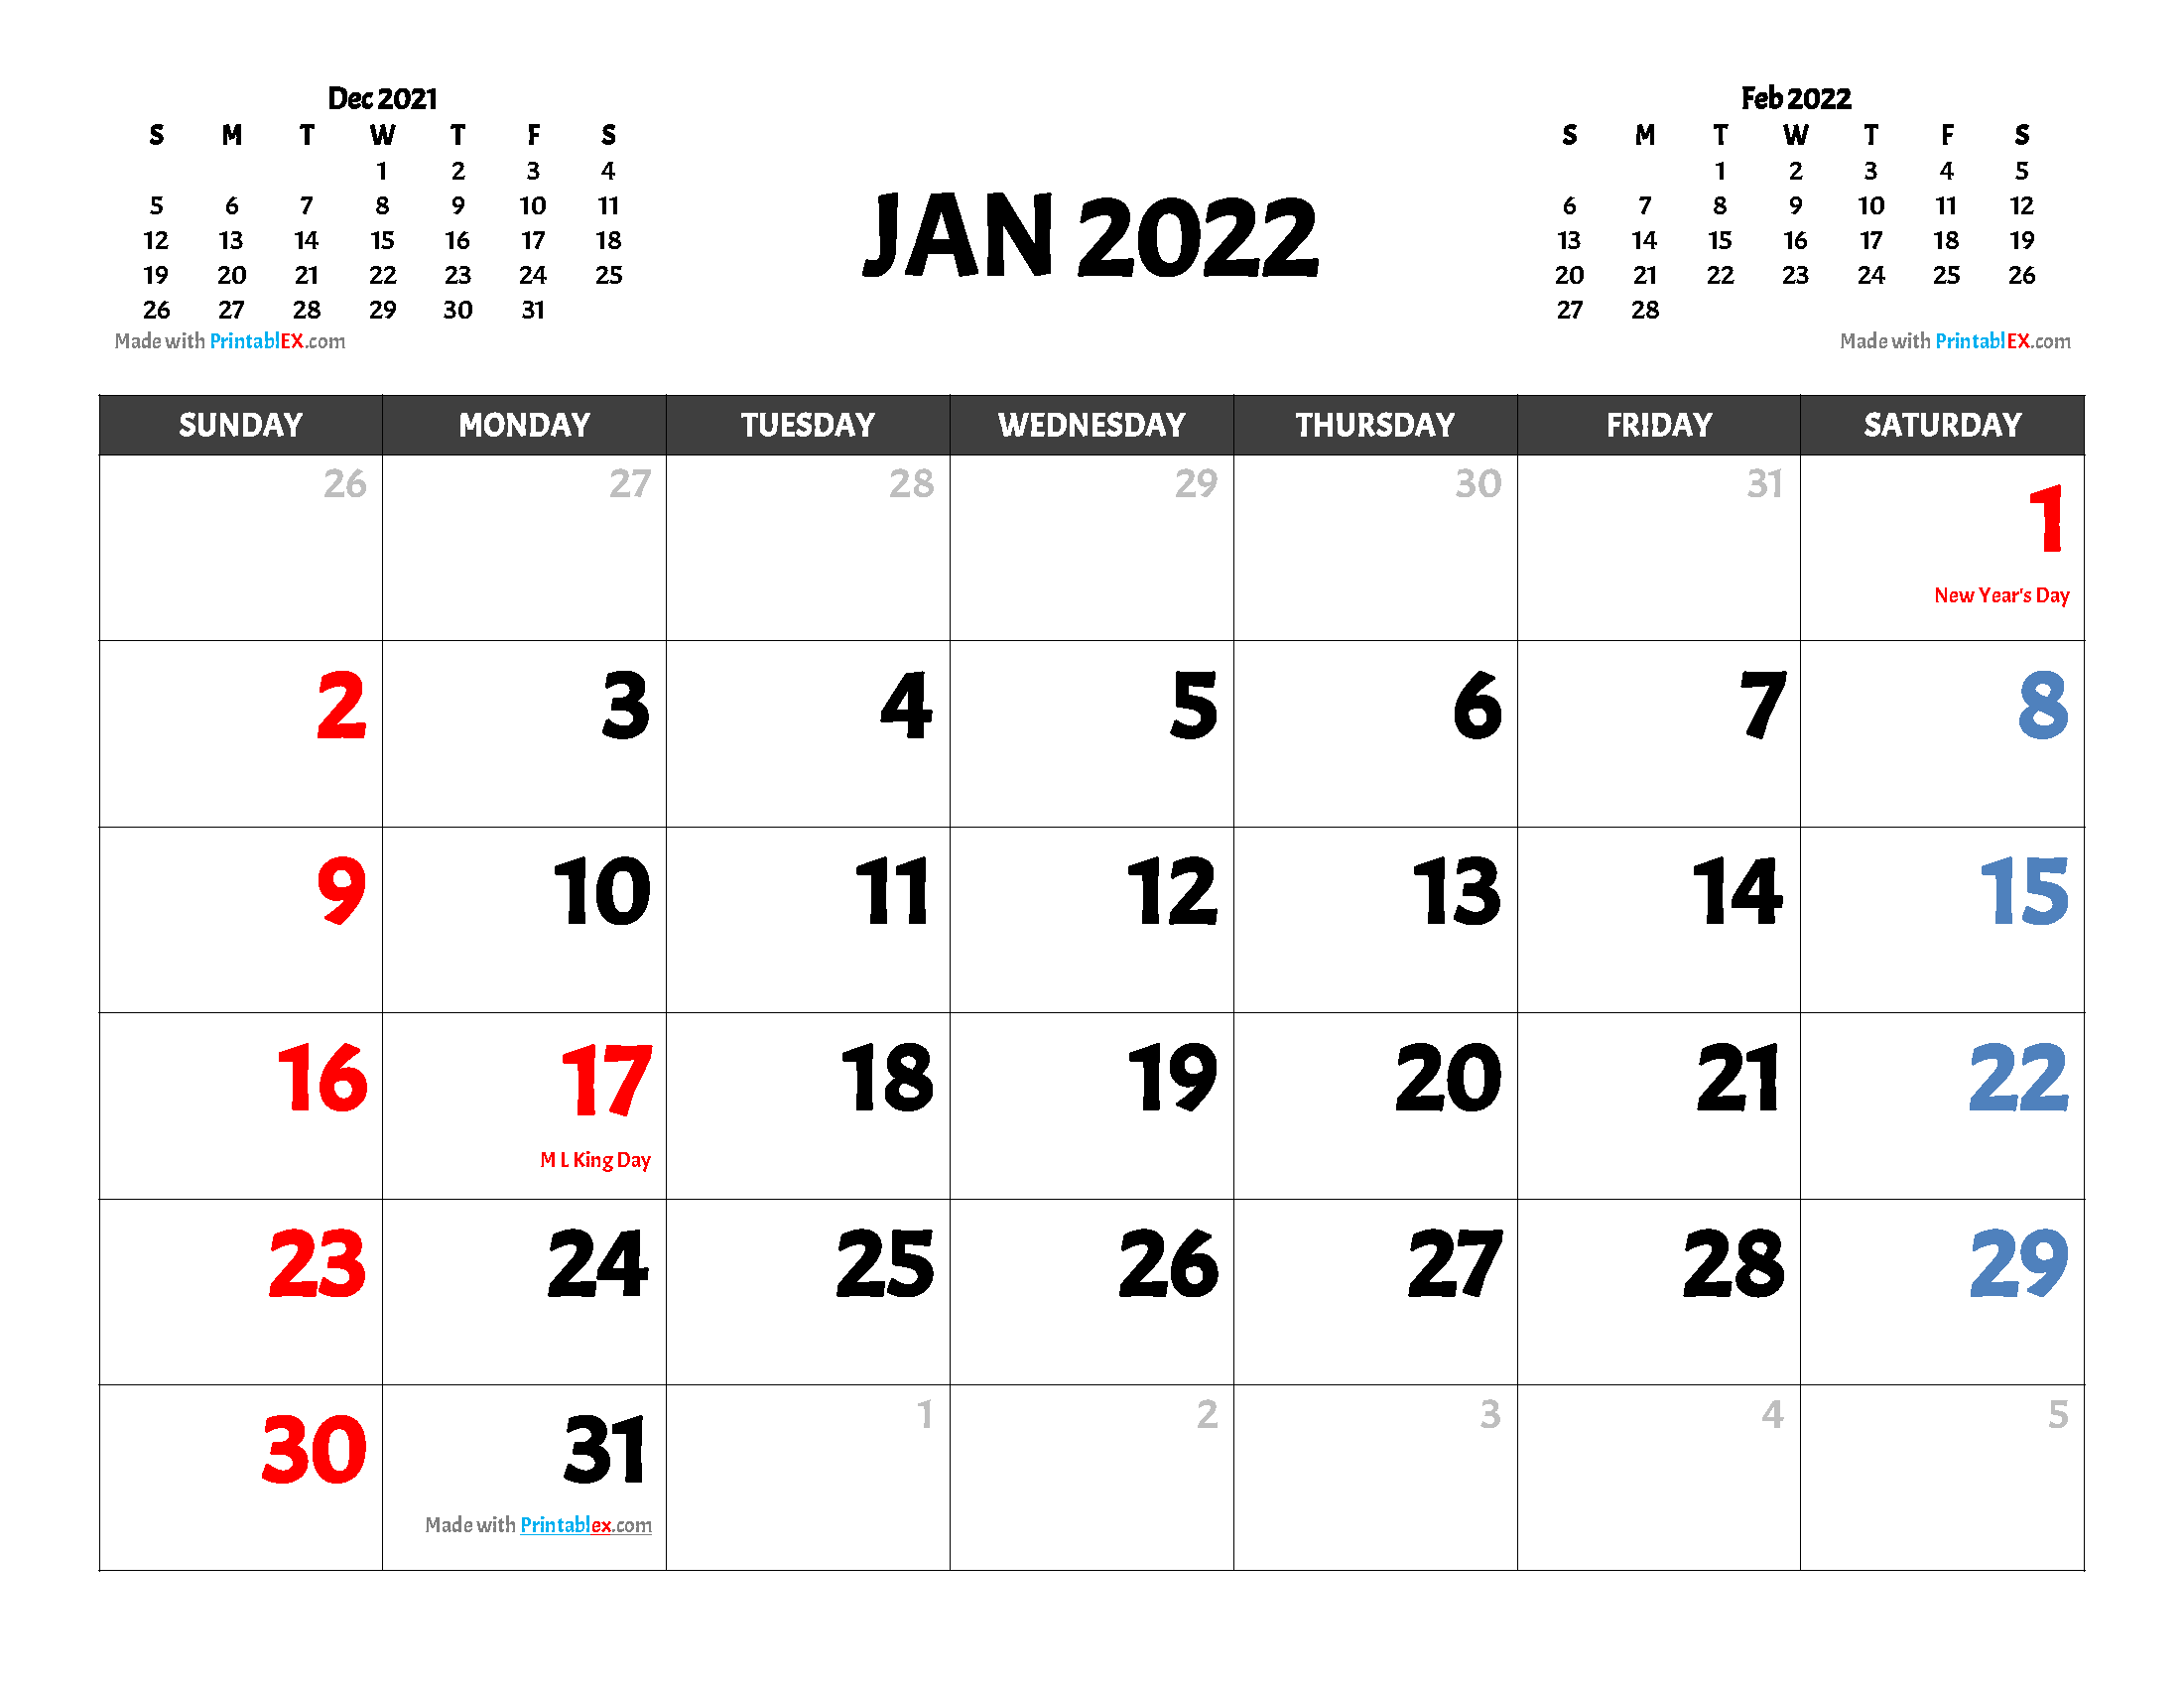 Free Printable January 2022 Calendar with holidays and observances in United States